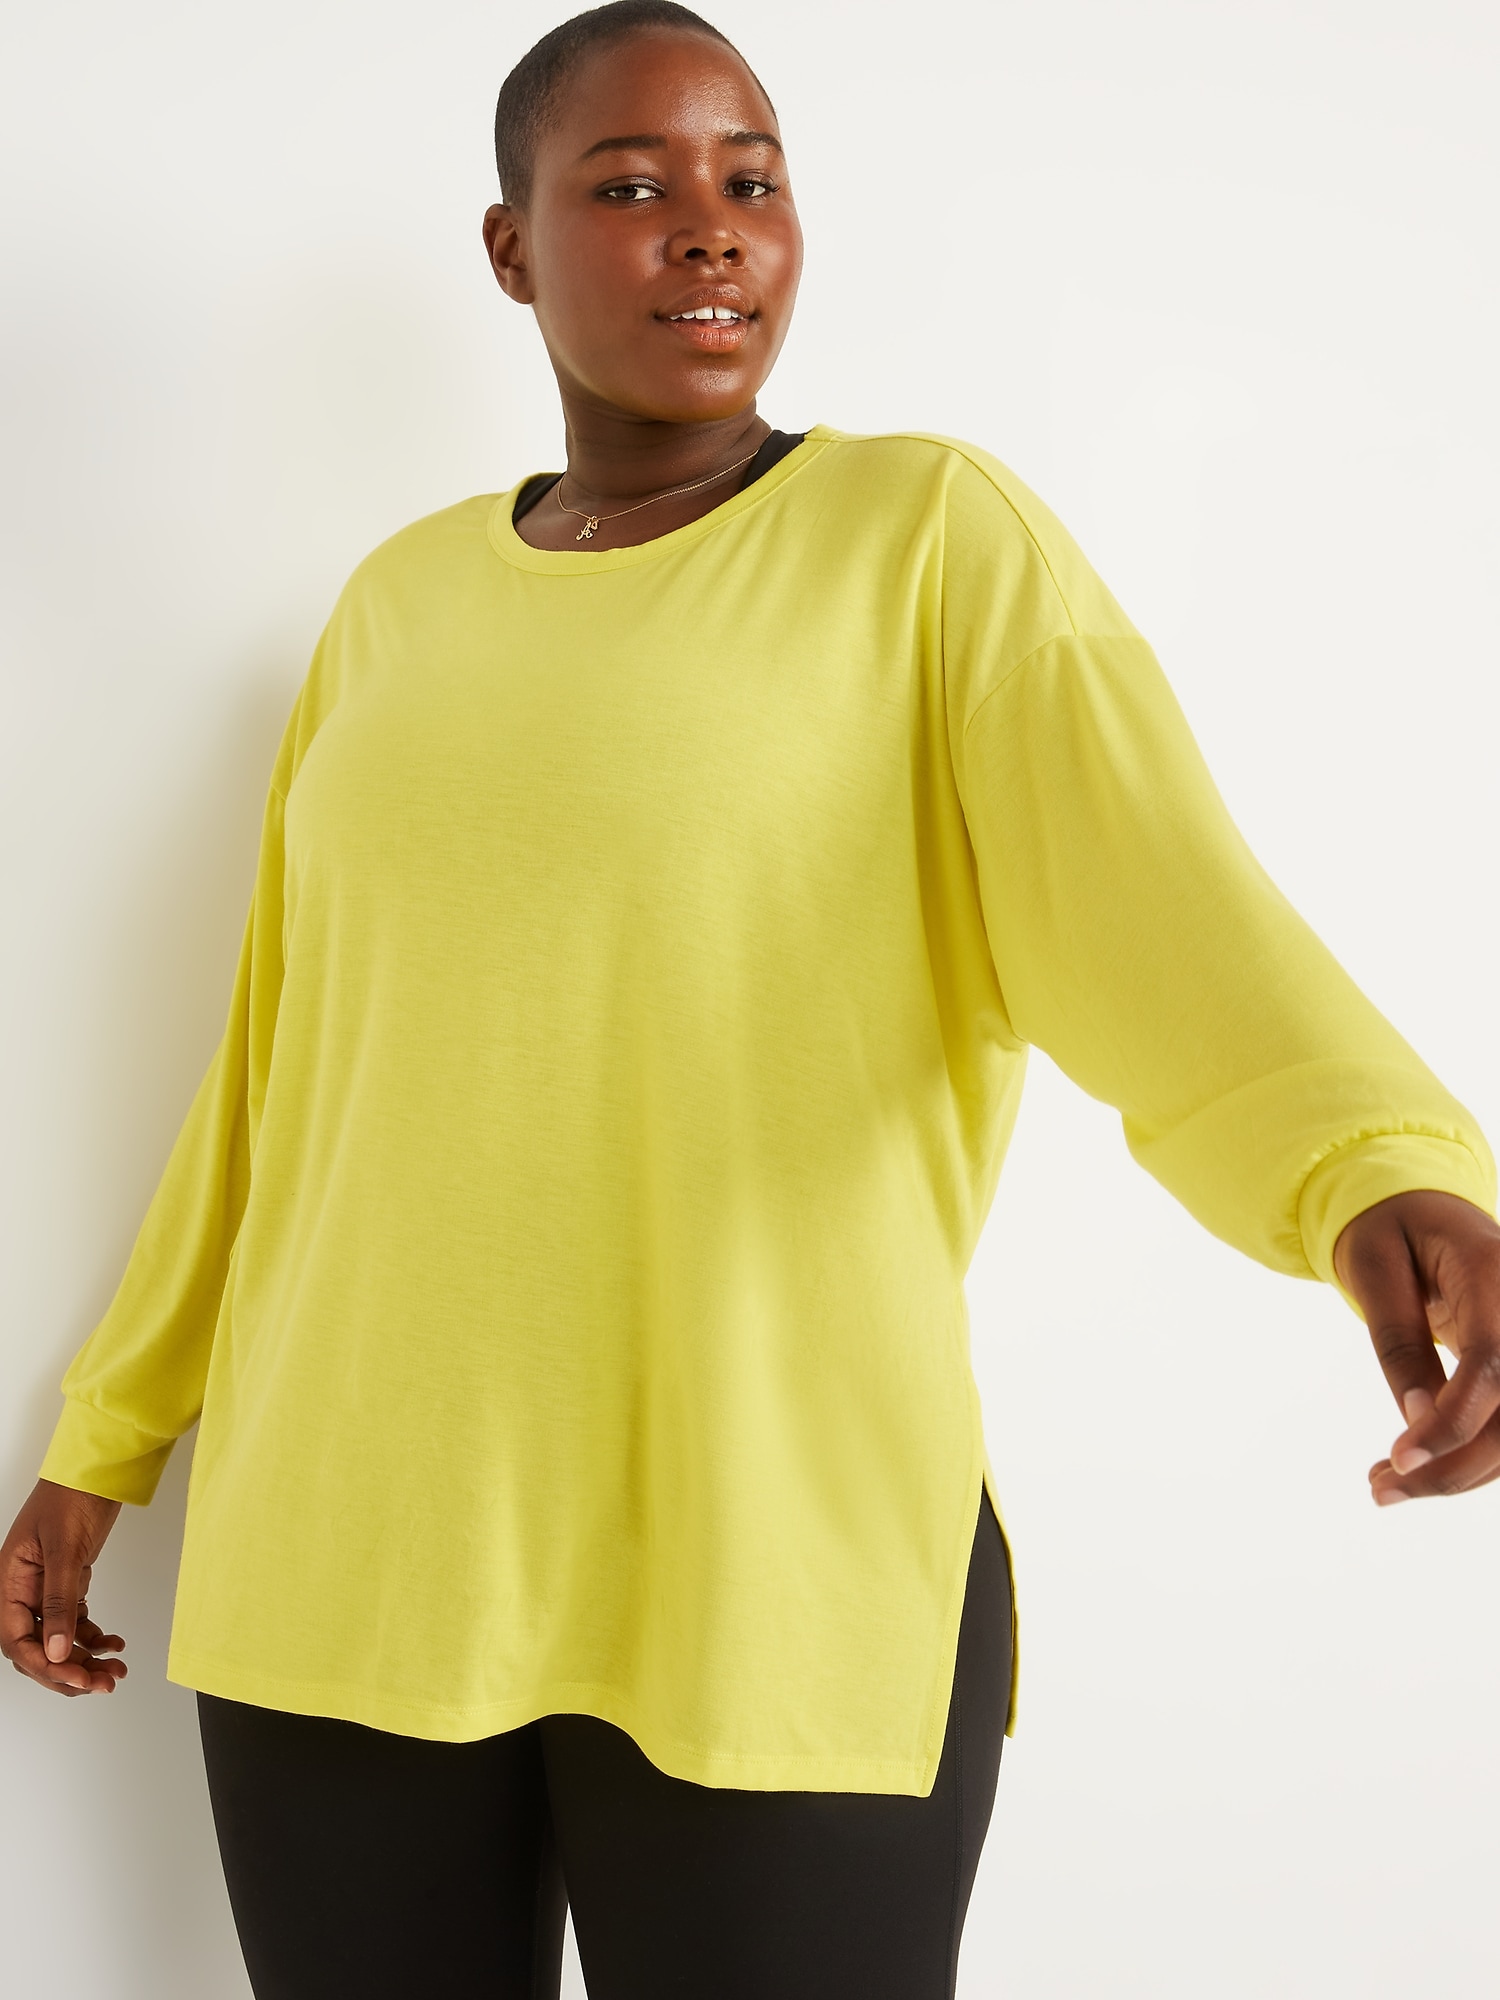 Long-Sleeve UltraLite All-Day Performance Tunic T-Shirt